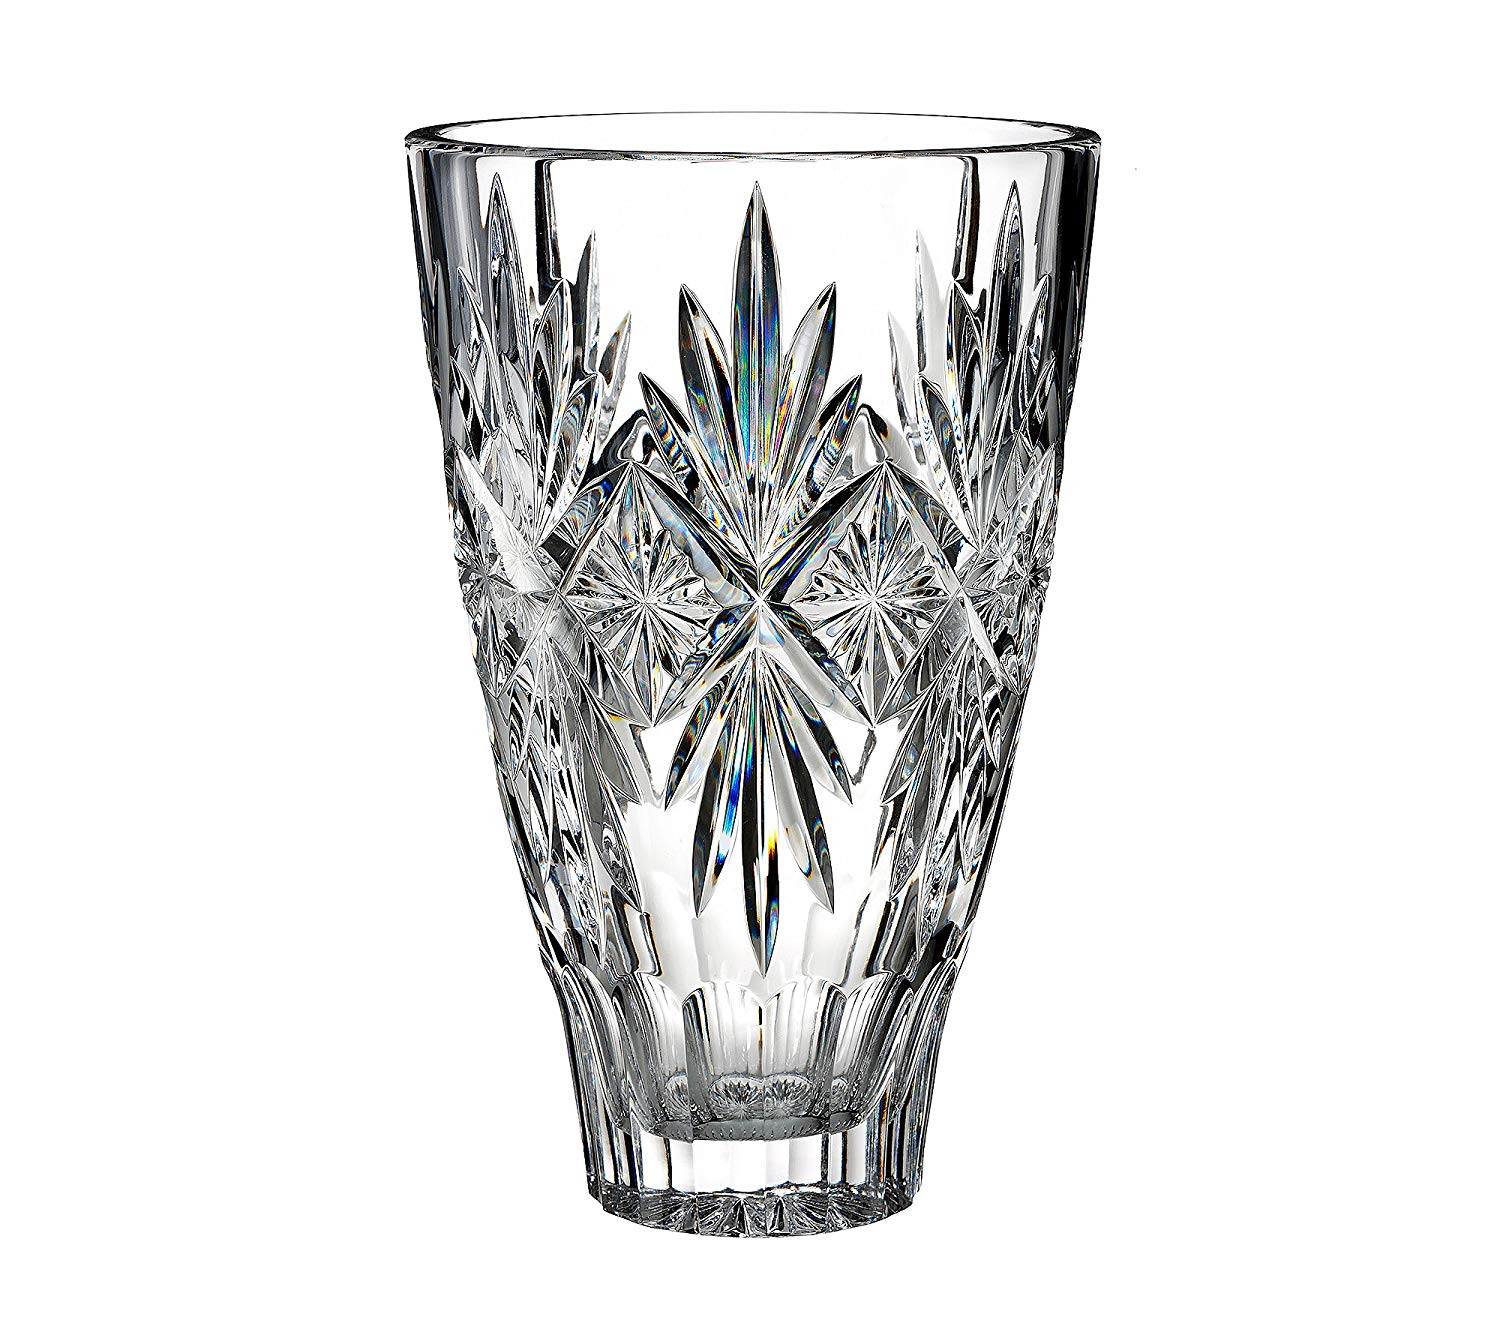 11 Lovable Marquis by Waterford Sheridan Flared 11 Crystal Vase 2024 free download marquis by waterford sheridan flared 11 crystal vase of amazon com waterford normandy vase home kitchen with 912uf oesel sl1500